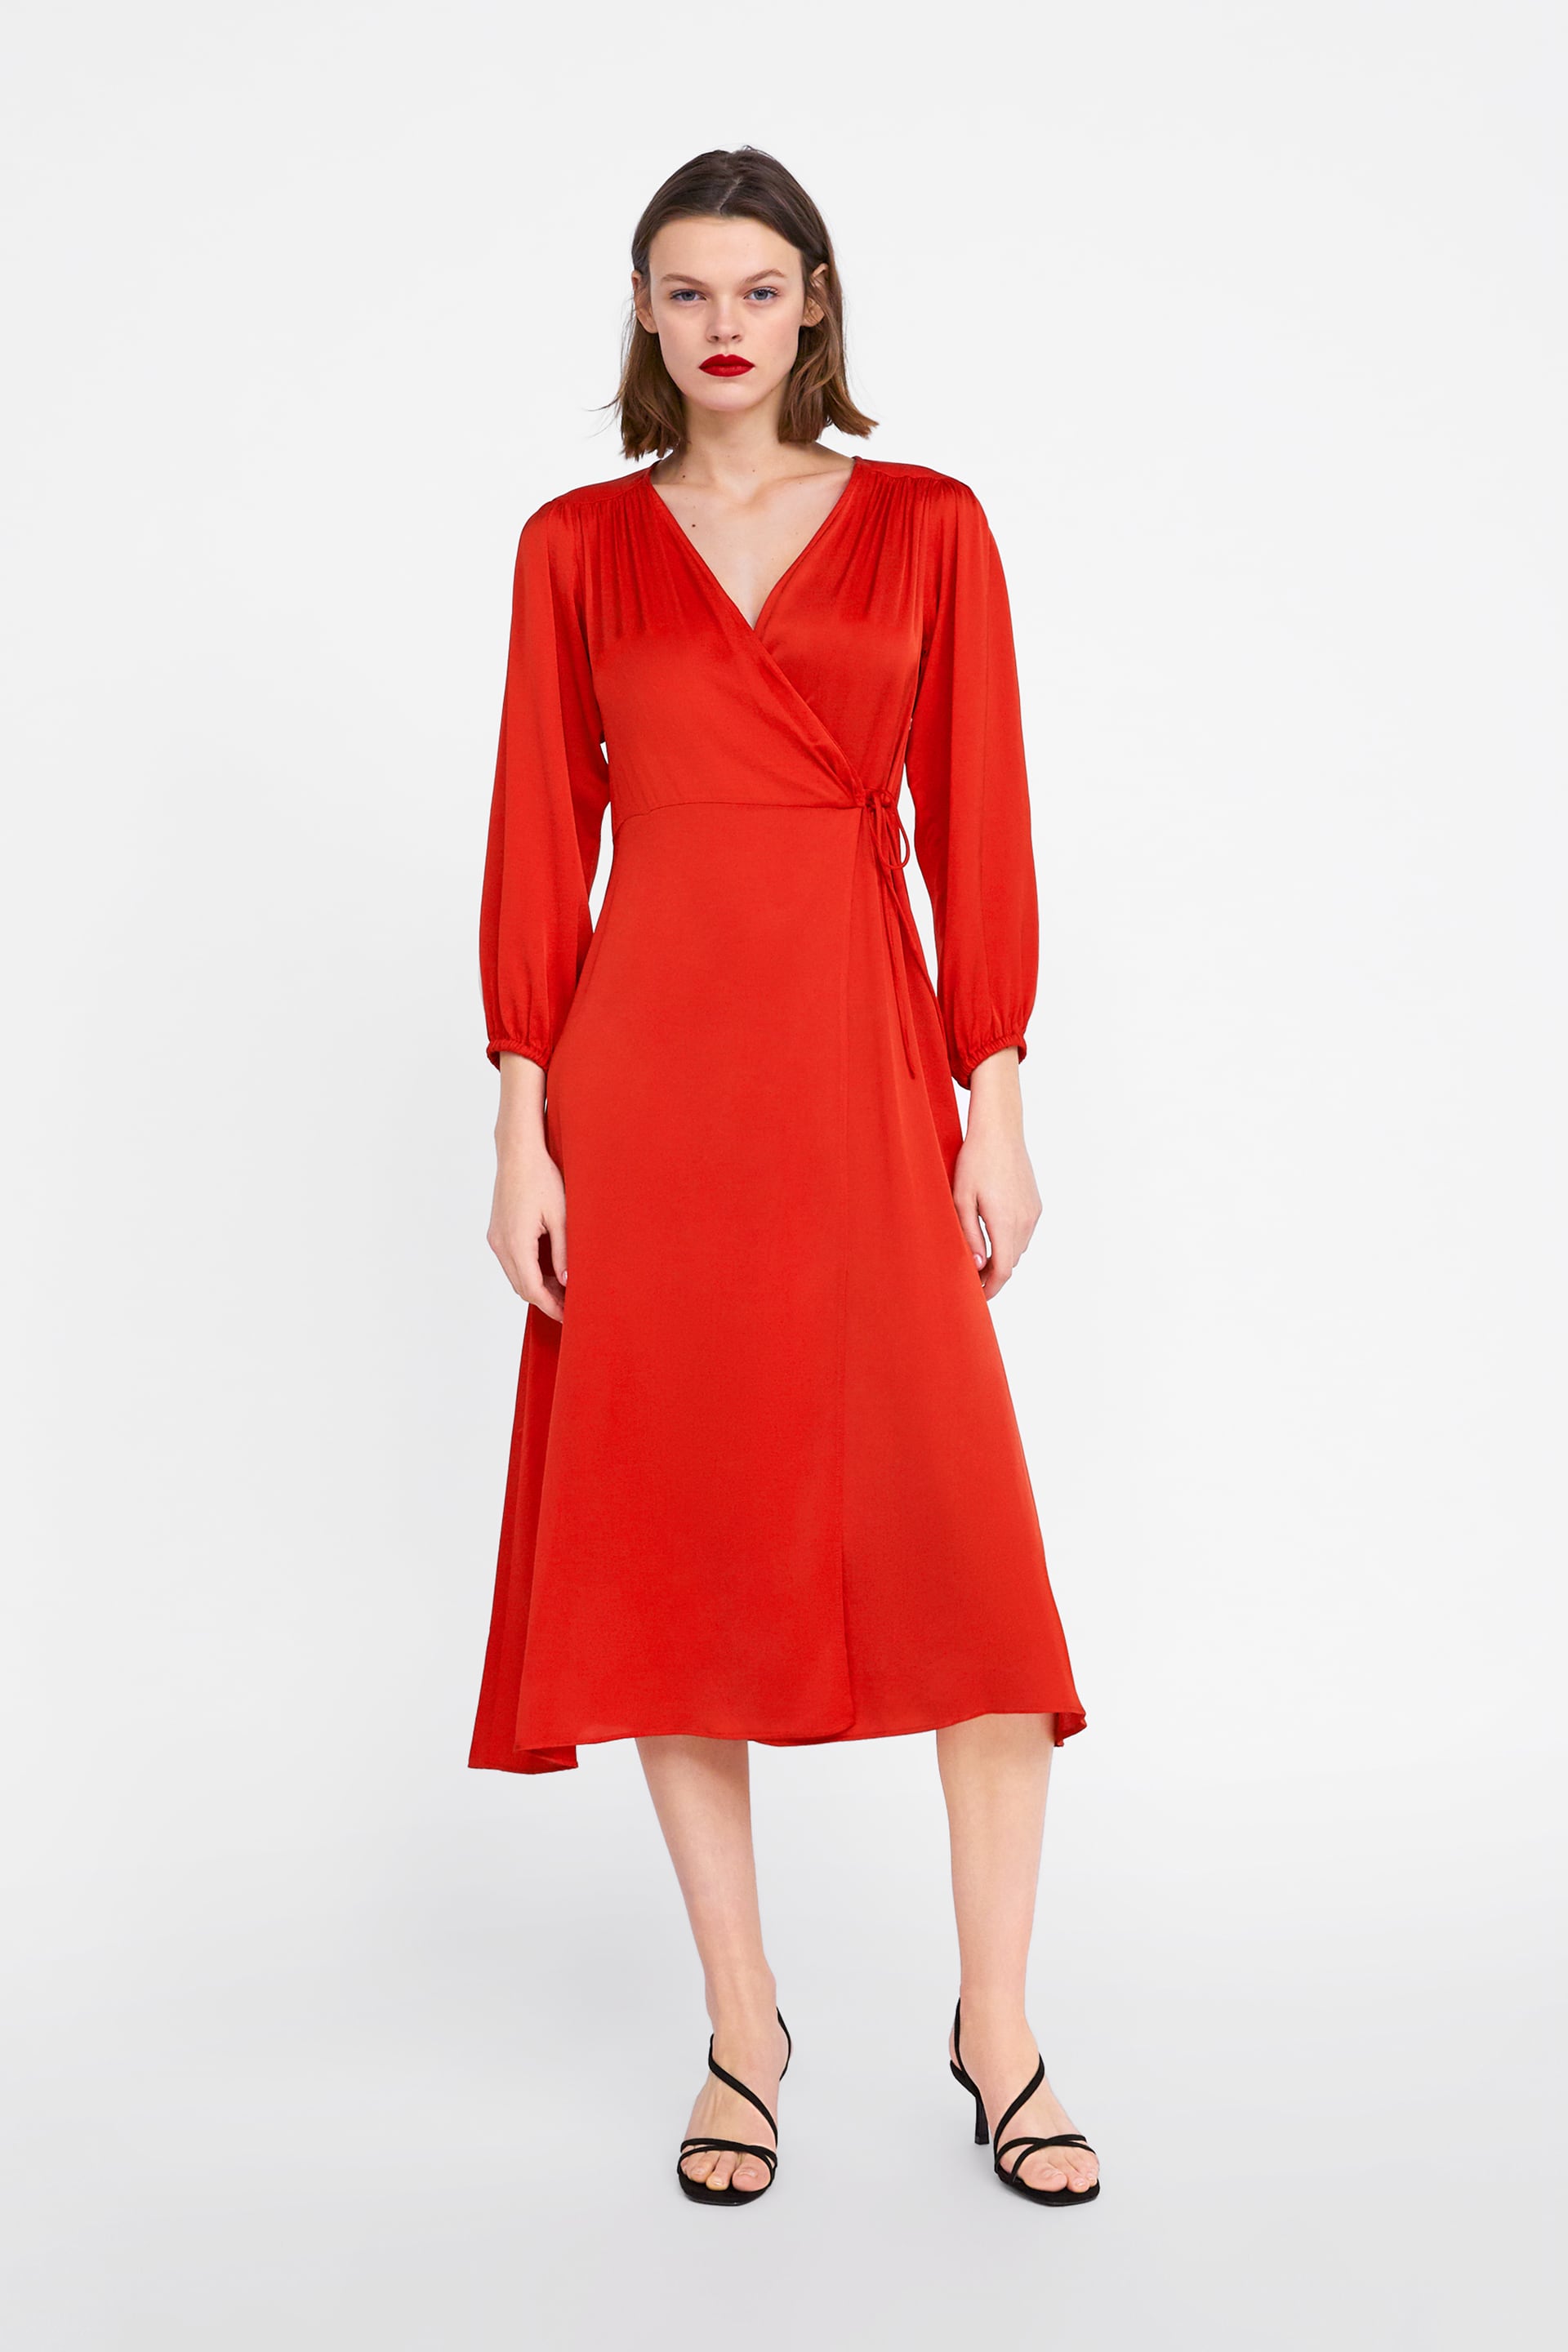 Zara Red Wrap Dress Outlet Sale, UP TO ...